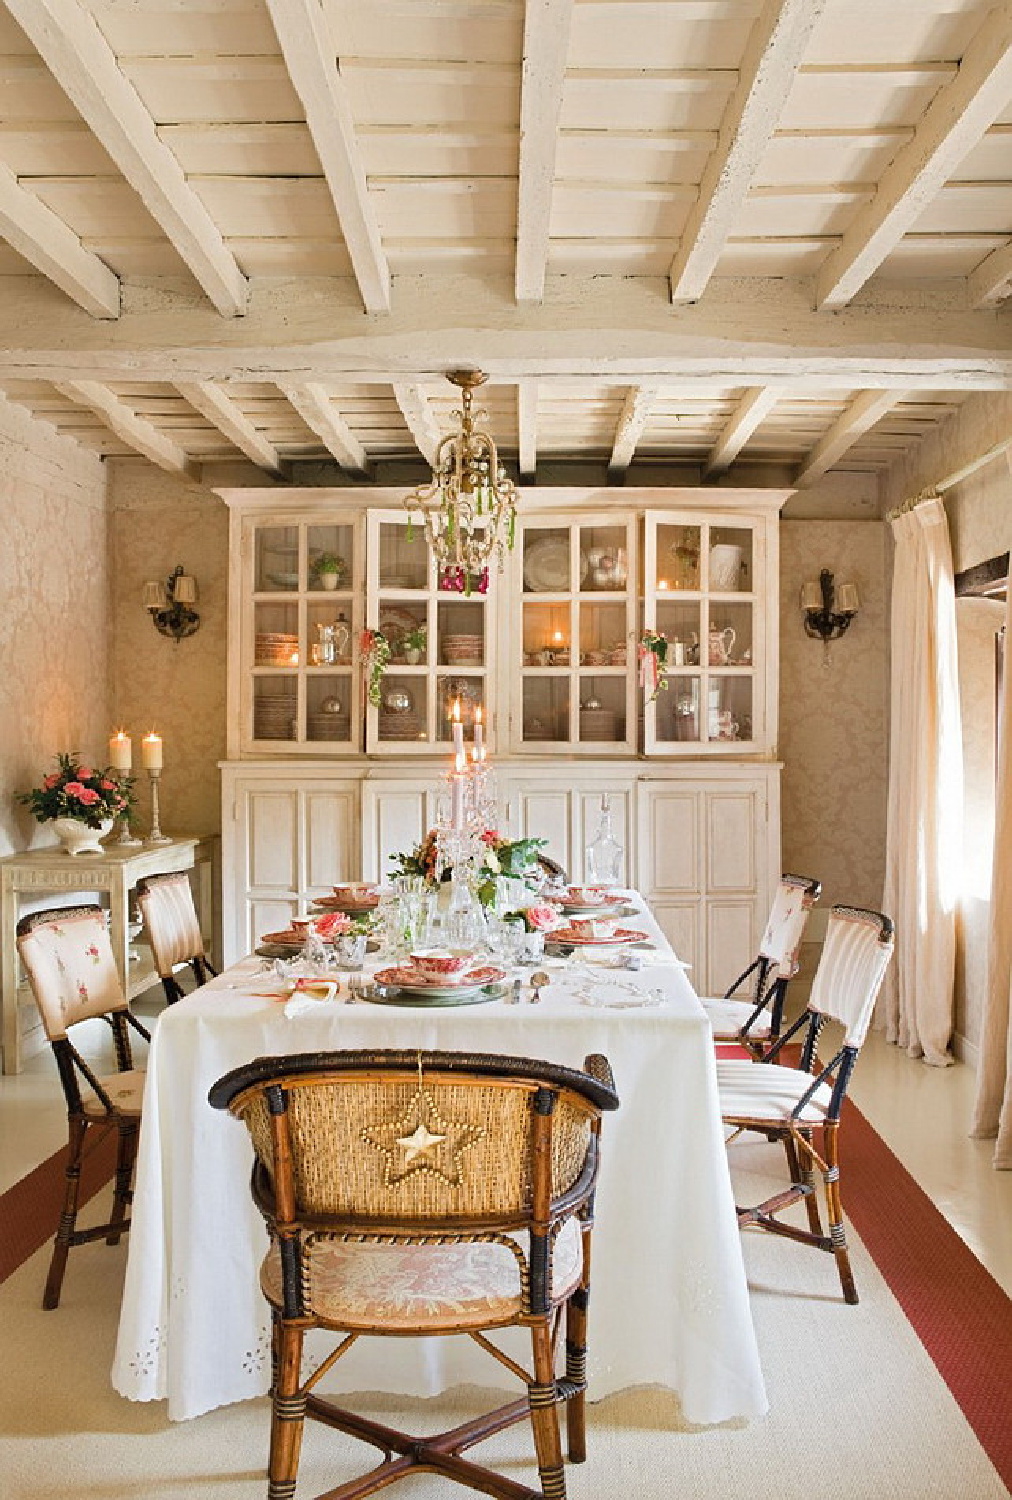 Charming rustic dining room in Spain, with French country decor, light green, pink, and holiday decorations - El Mueble magazine. #frenchcountrychristmas #pinkchristmas #countryfrenchdecor #rusticdiningroom